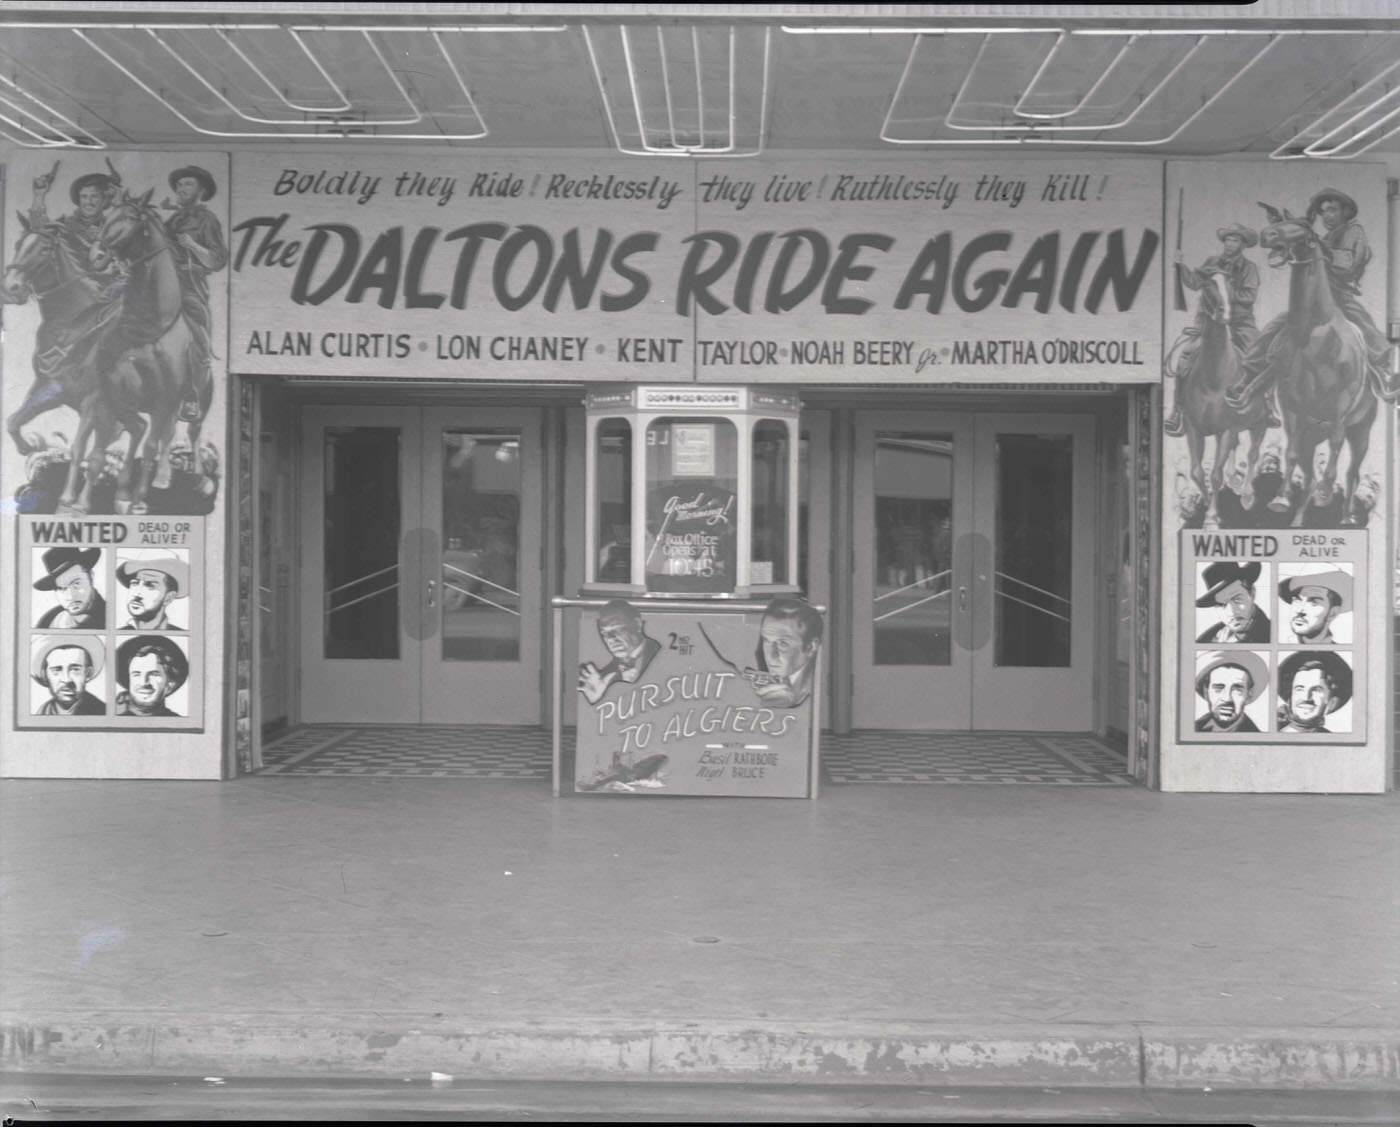 Rialto Theatre Exterior, 1946. Promotional material for "The Daltons Ride Again" is on display.